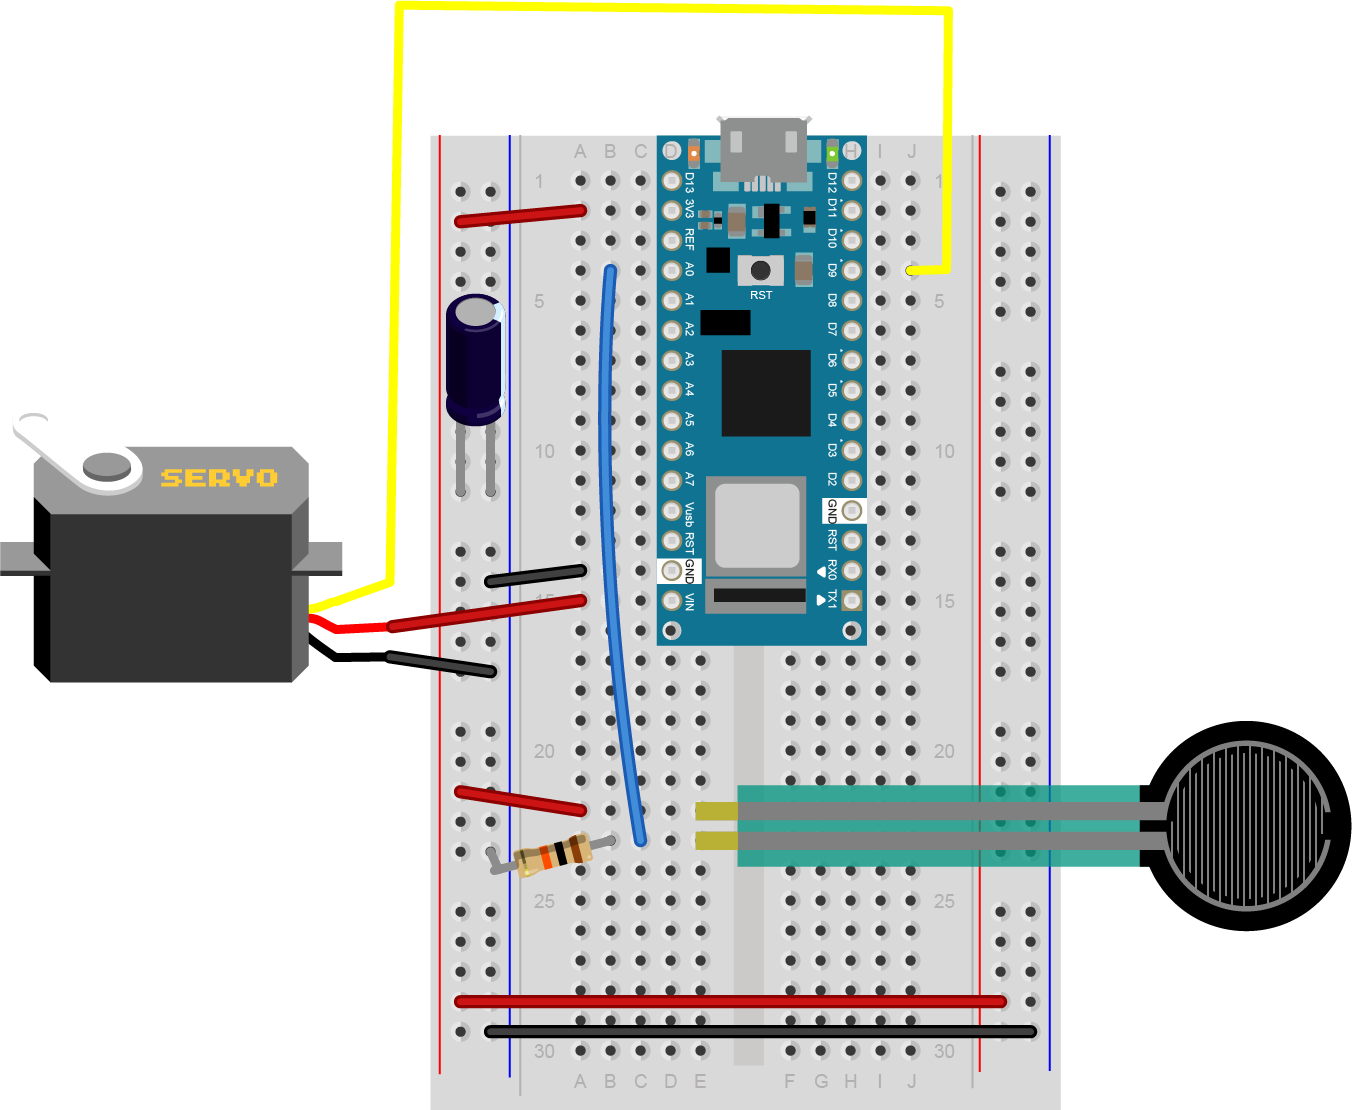 Breadboard view of an Arduino Nano 33 IoT connected to a voltage divider input circuit on analog in pin 0 and a servomotor on digital pin 9. A fixed 10-kilohm resistor is attached to analog in pin 0 and to ground on the Arduino. A variable resistor is attached to analog in pin 0 and to Vin pin (+5 volts). A servomotor's control wire is attached to digital pin D3. The motor's voltage input is attached to Vin, and its ground is attached to ground on the Arduino. A 10-microfarad capacitor is mounted across the 3.3V and ground buses.